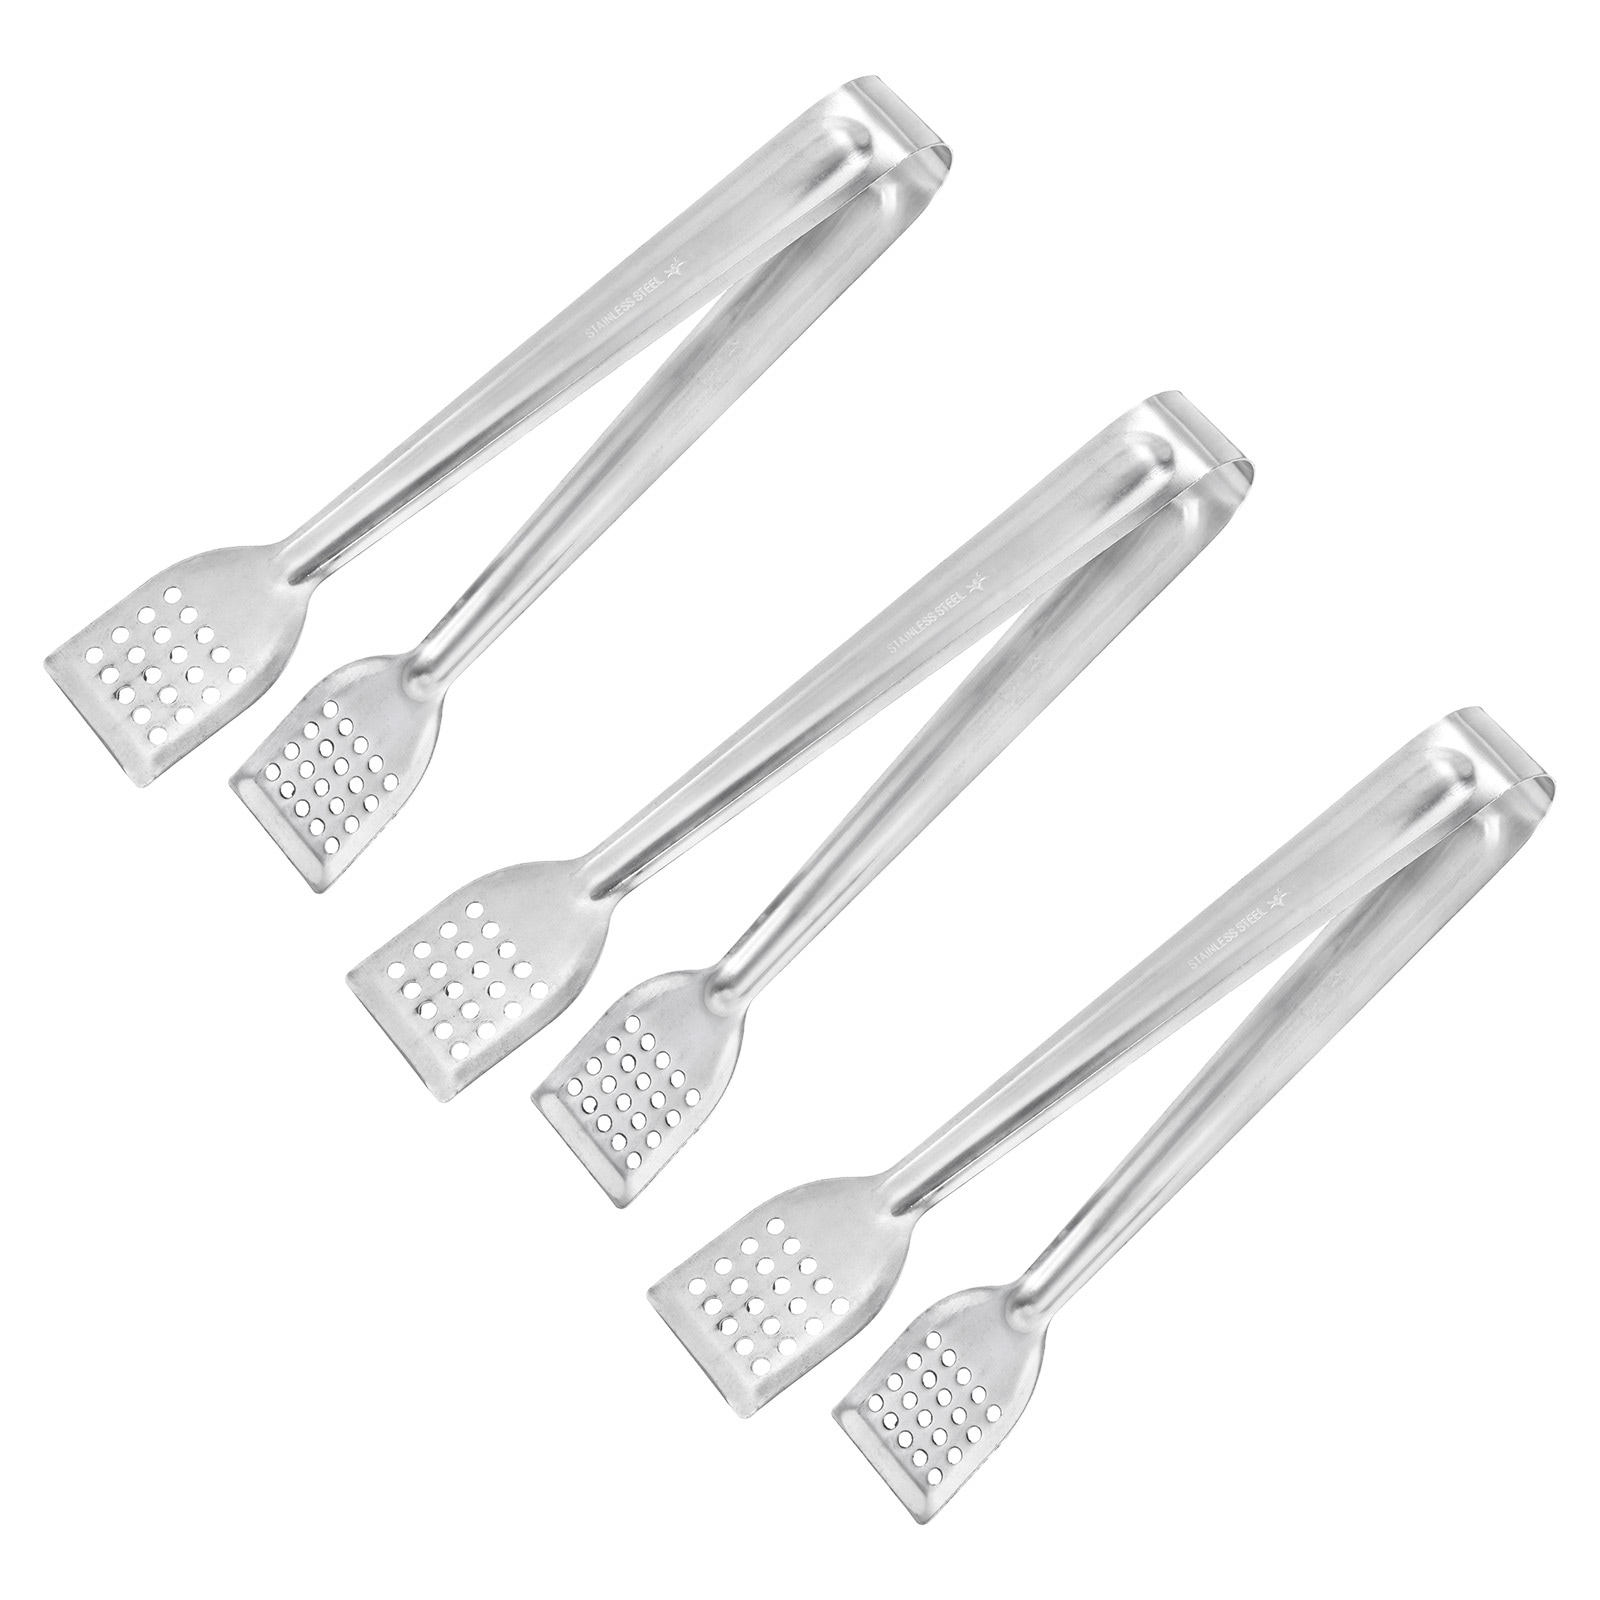 https://ak1.ostkcdn.com/images/products/is/images/direct/dc8a8f5f6d6a5d7db0f2e7565f38421e96f059f7/Serving-Tongs%2C-3pcs-8-Inch-Stainless-Steel-Ice-Tongs%2C-Mini-Sugar-Tongs.jpg